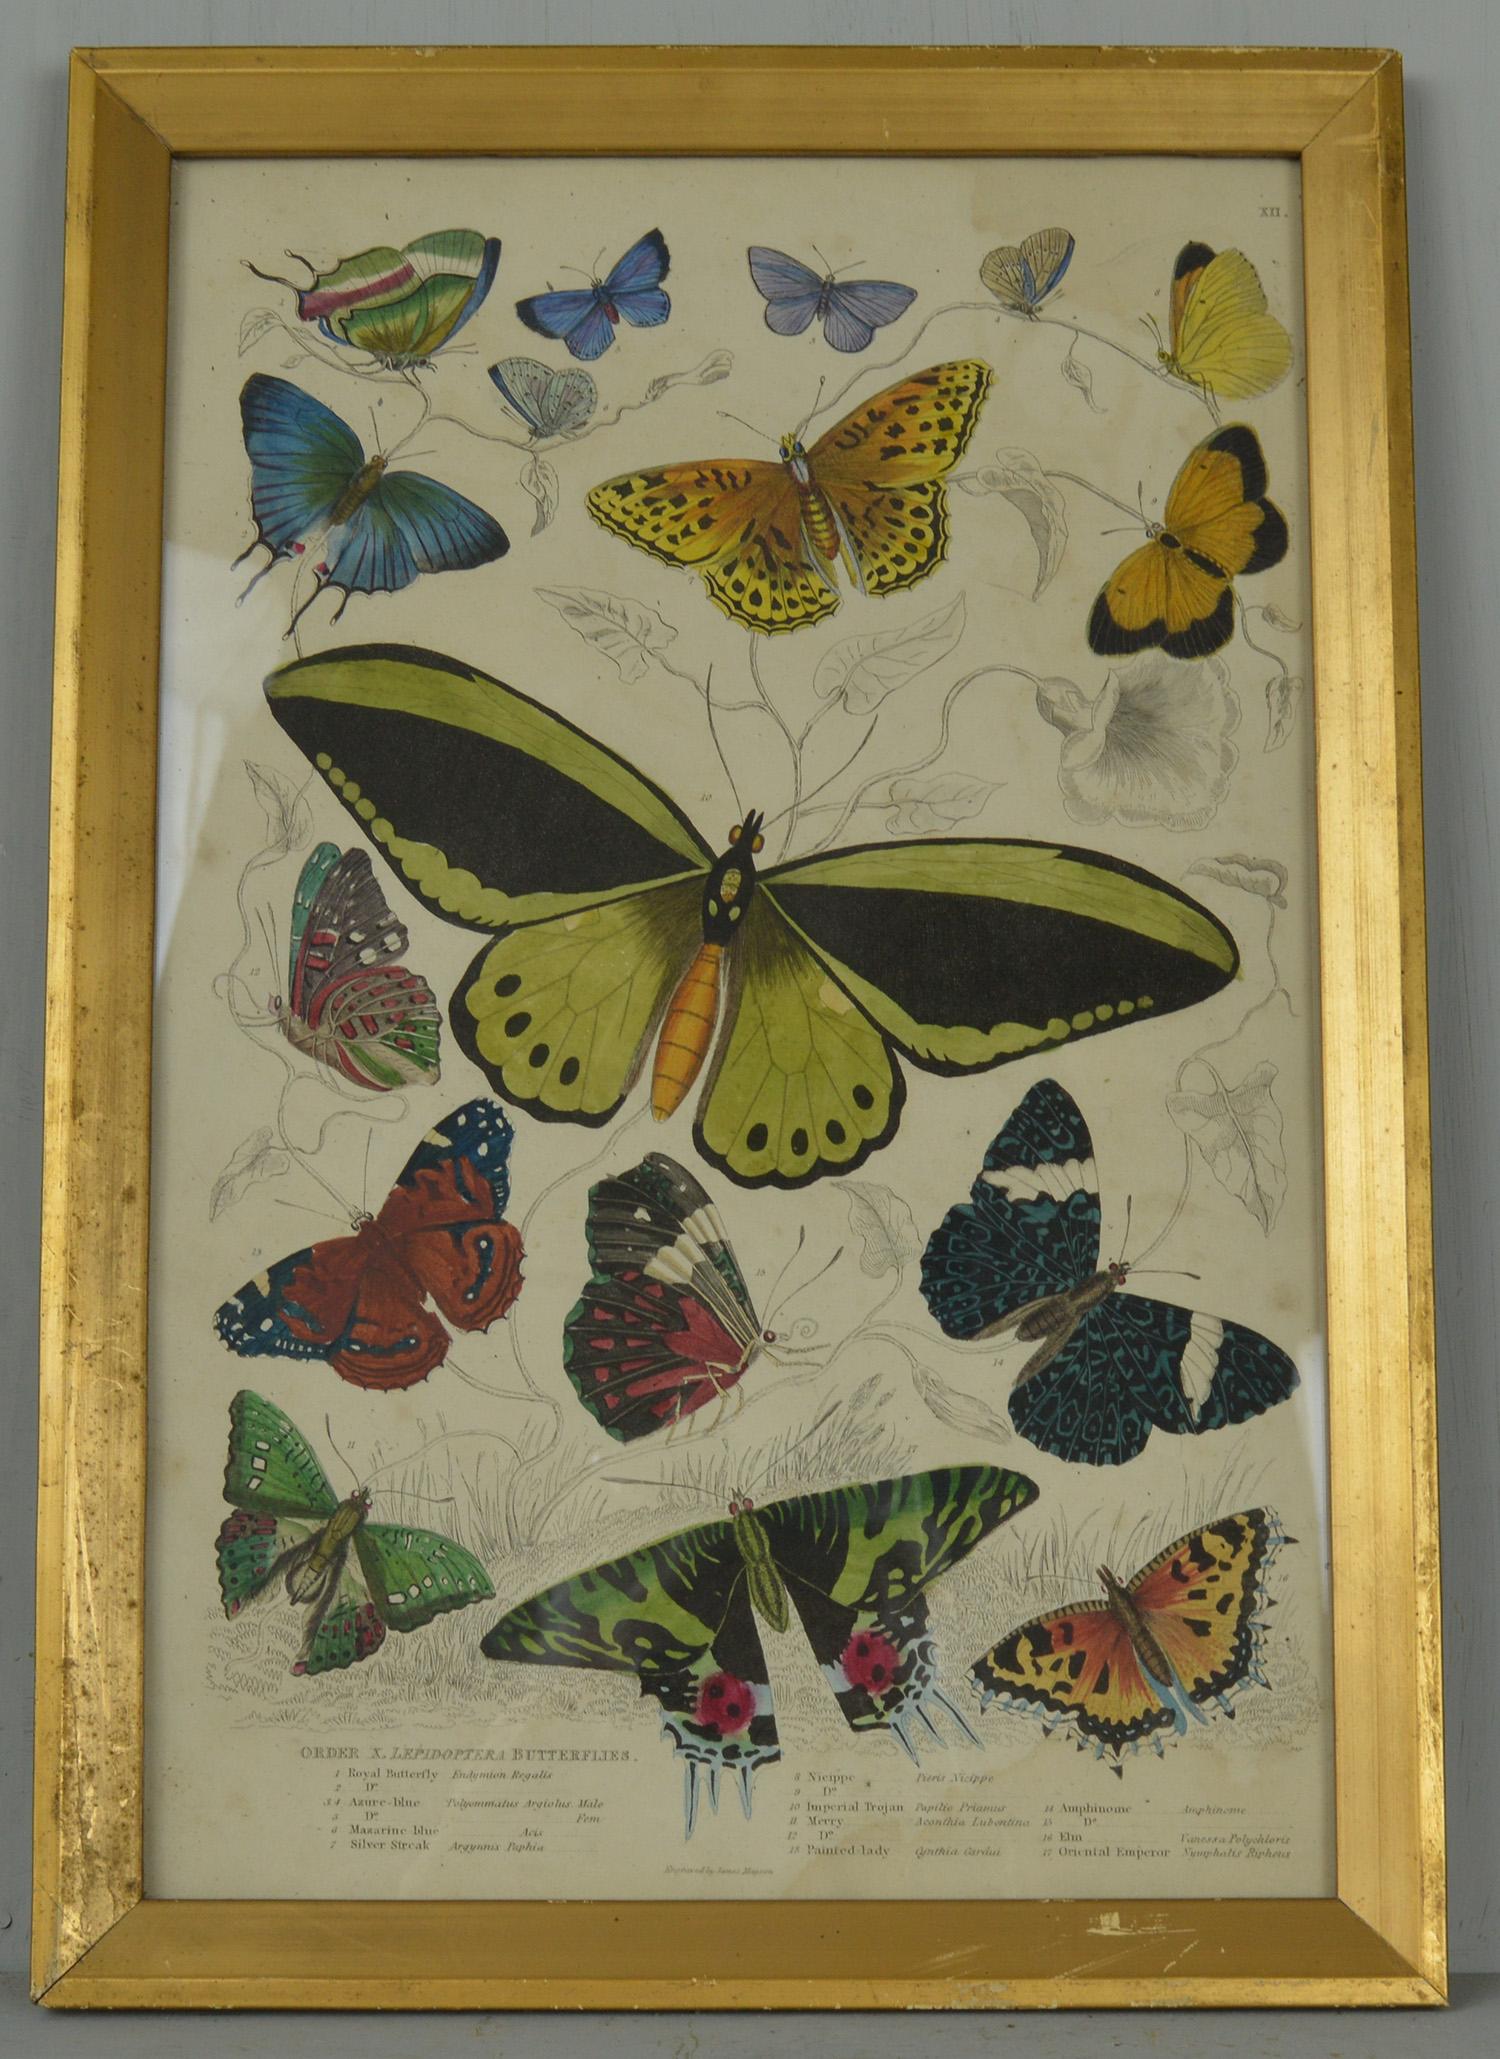 Great image of butterflies.

Hand-colored lithograph.

Original color.

From The Edinburgh Journal of Natural History.

Published by Smith, Elder, 1835.

Presented in an antique distressed gilt frame.

The measurement given below is the